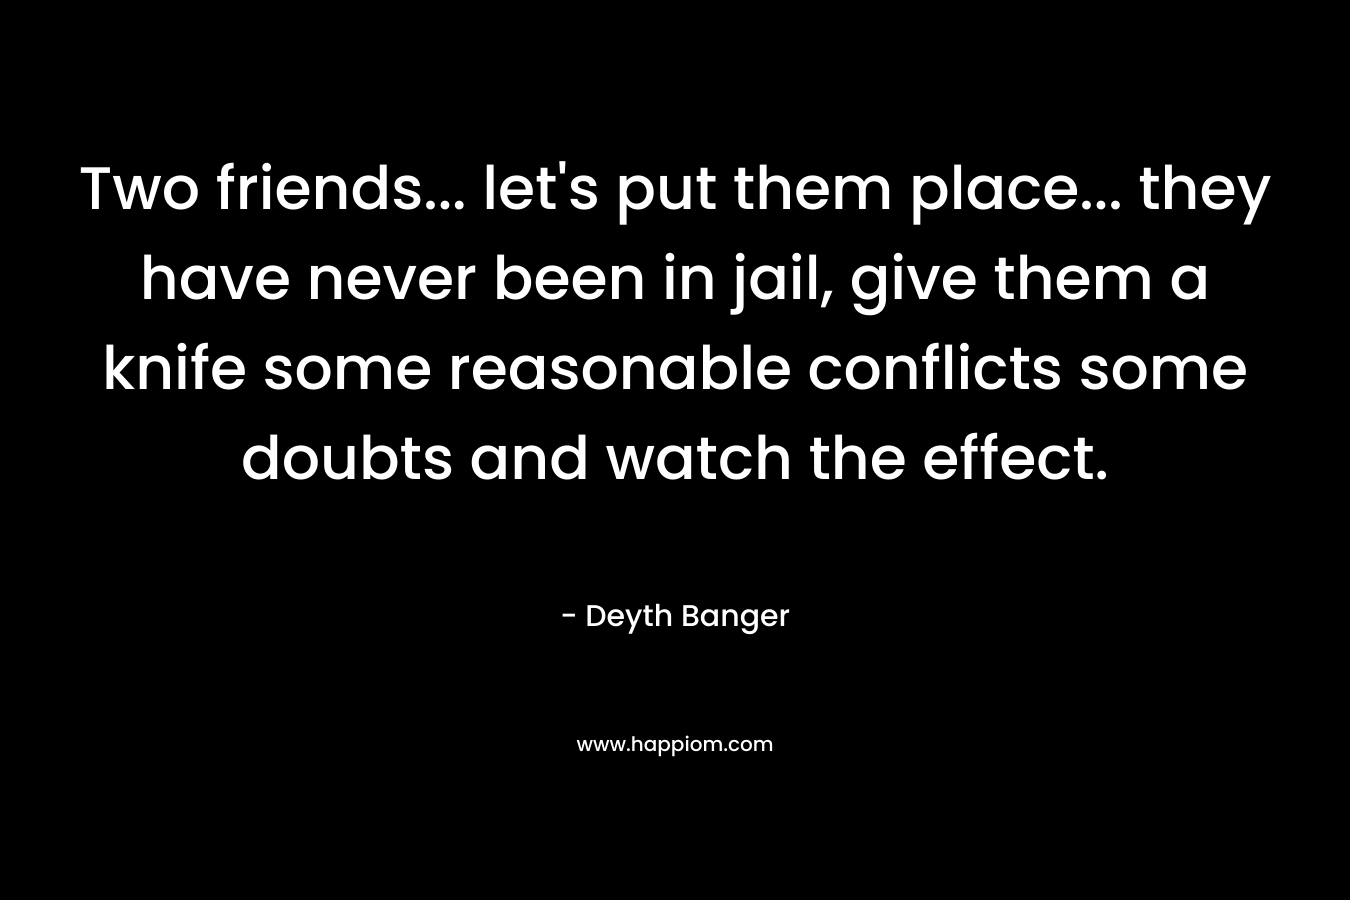 Two friends… let’s put them place… they have never been in jail, give them a knife some reasonable conflicts some doubts and watch the effect. – Deyth Banger